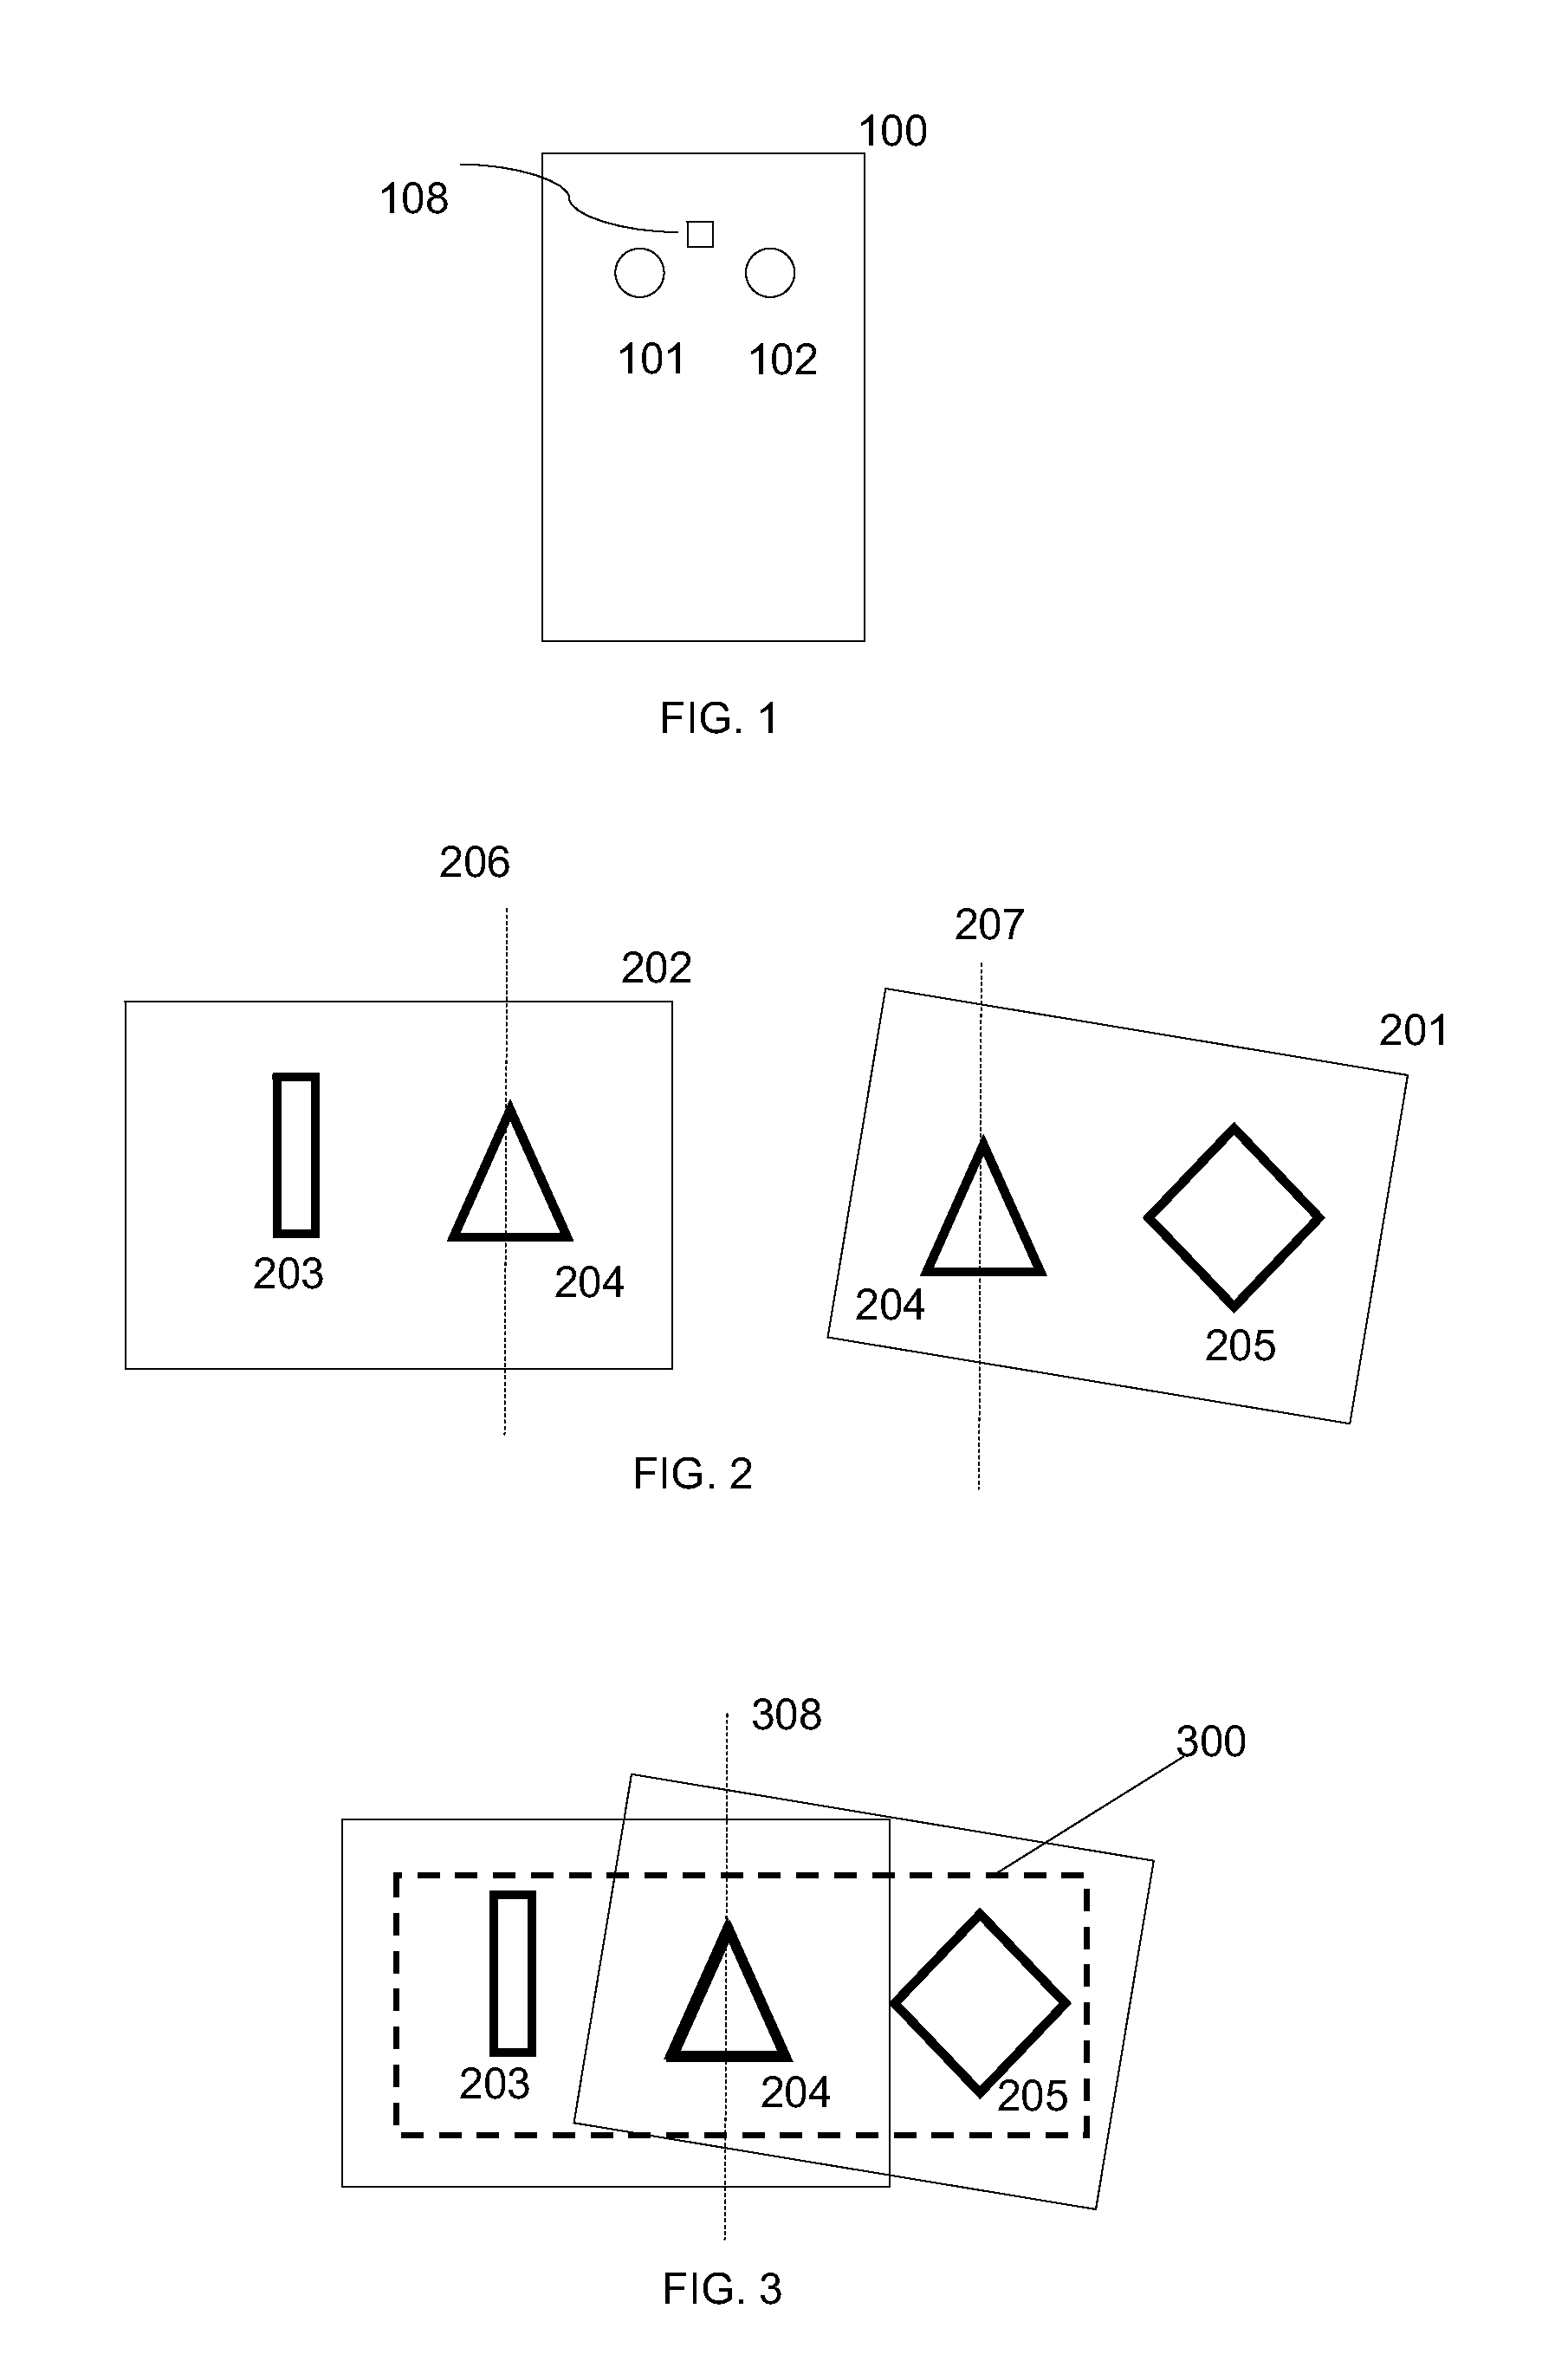 Large, Ultra-Thin And Ultra-Light Connectable Display For A Computing Device